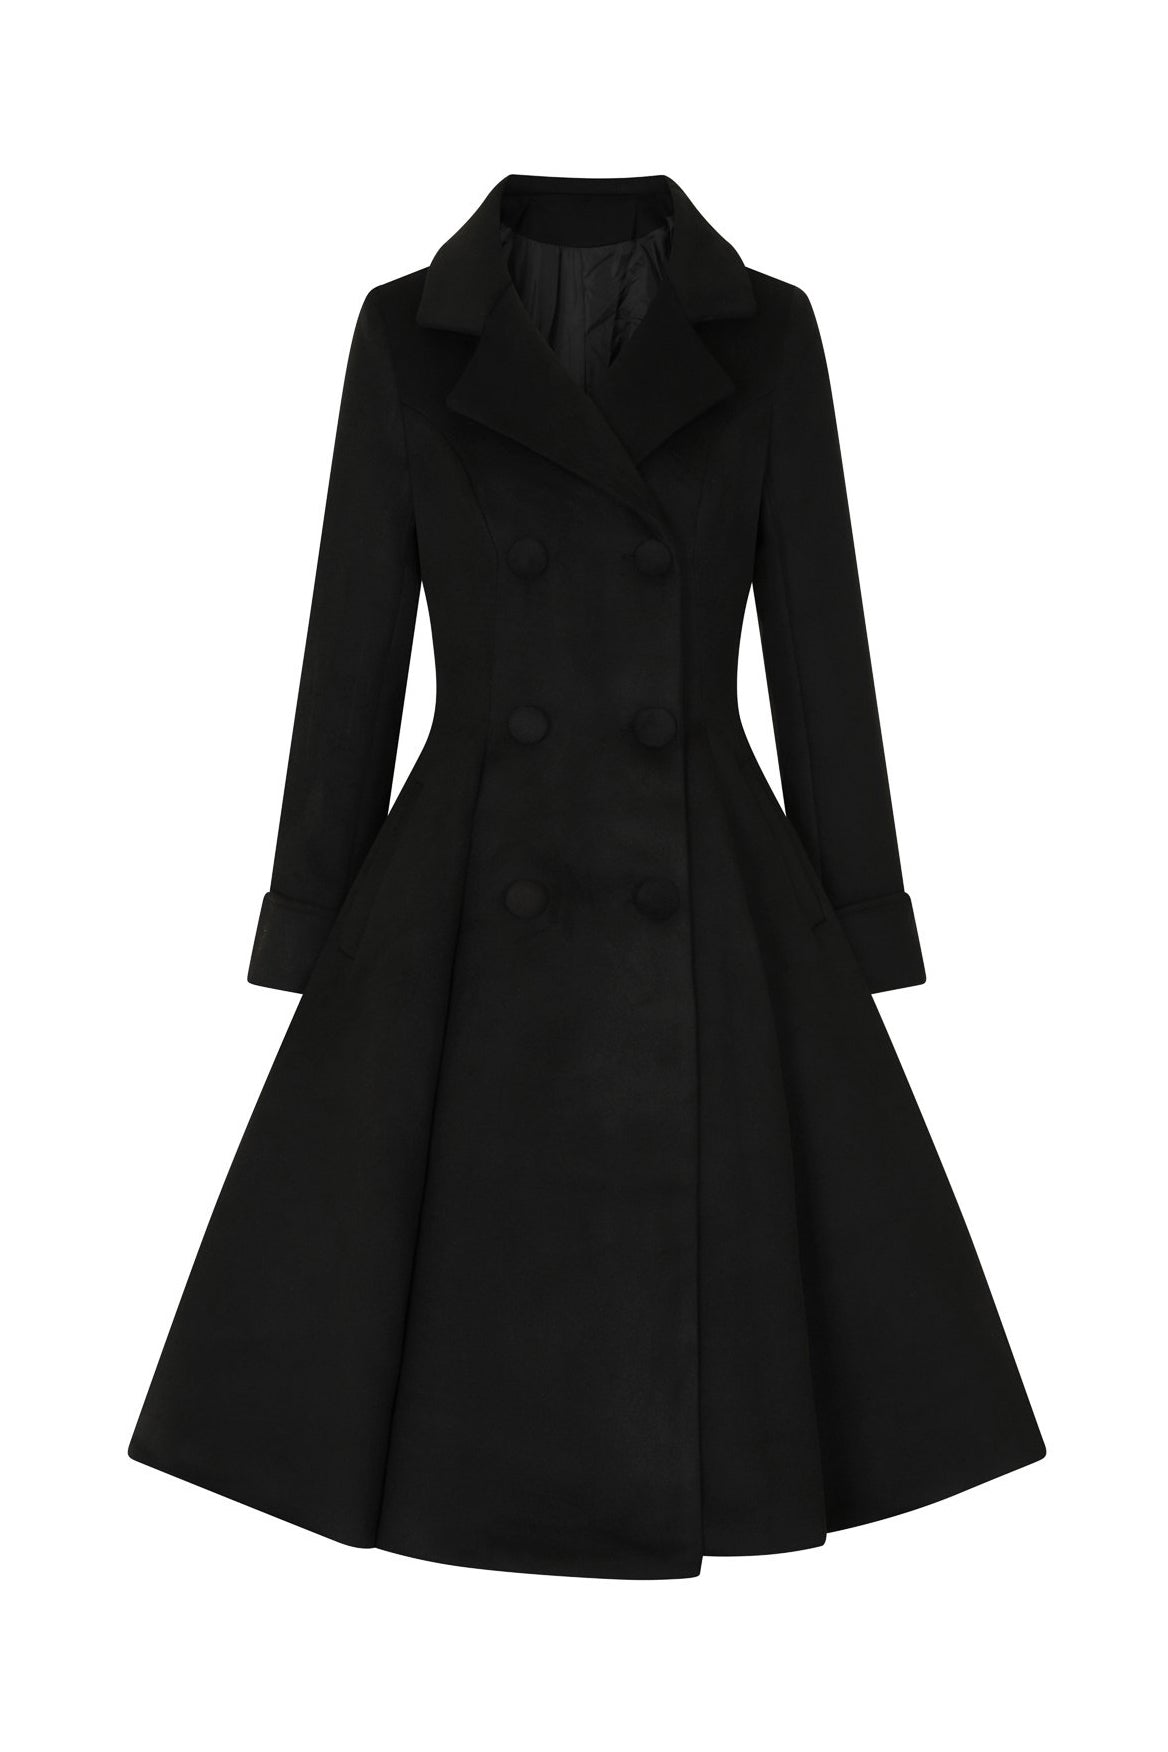 Black Vintage Inspired Classic Double Breasted Swing Coat – Pretty ...